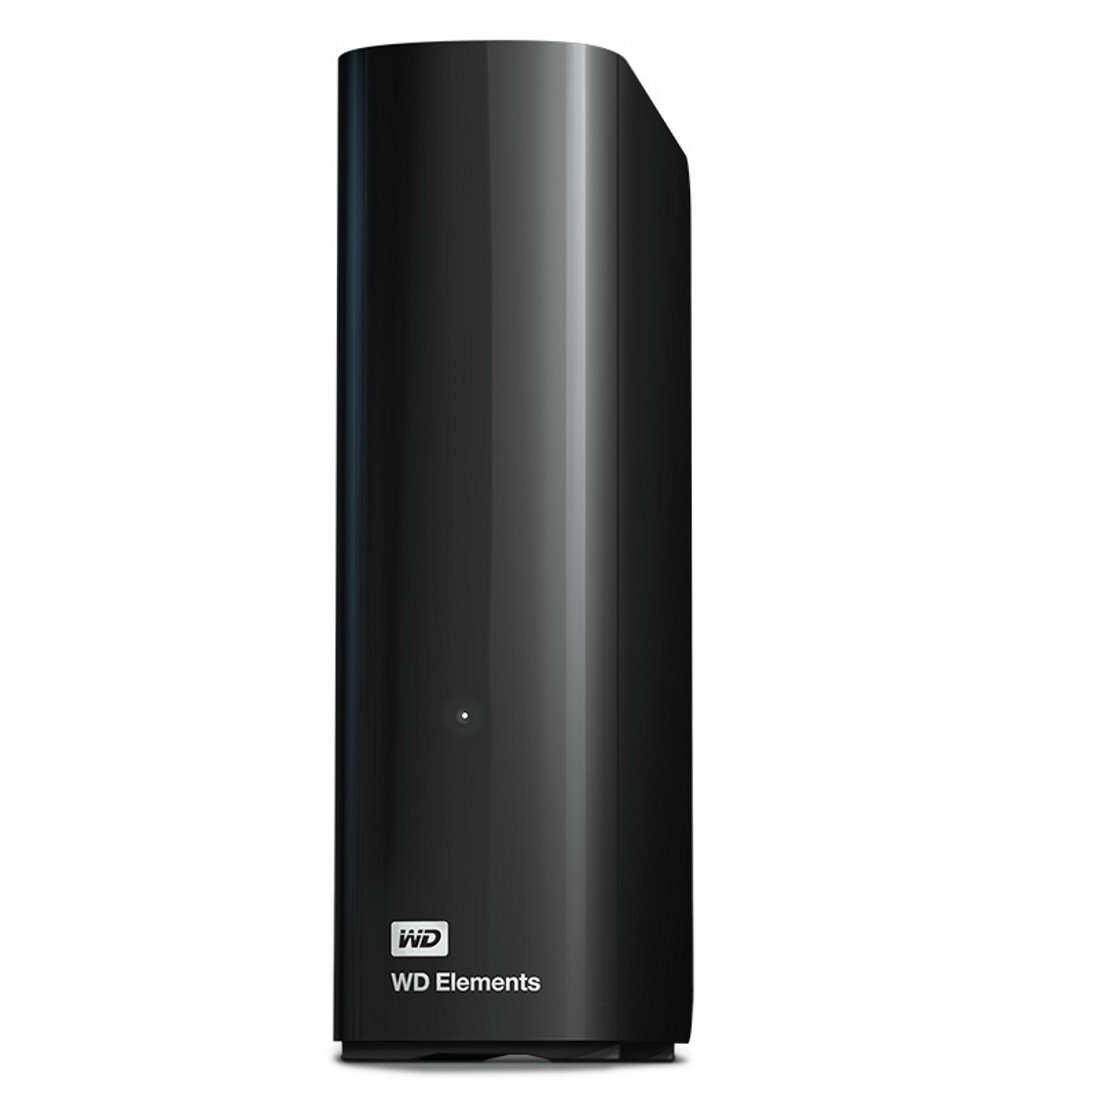 WD Elements 4TB Elements Hard Drive Review